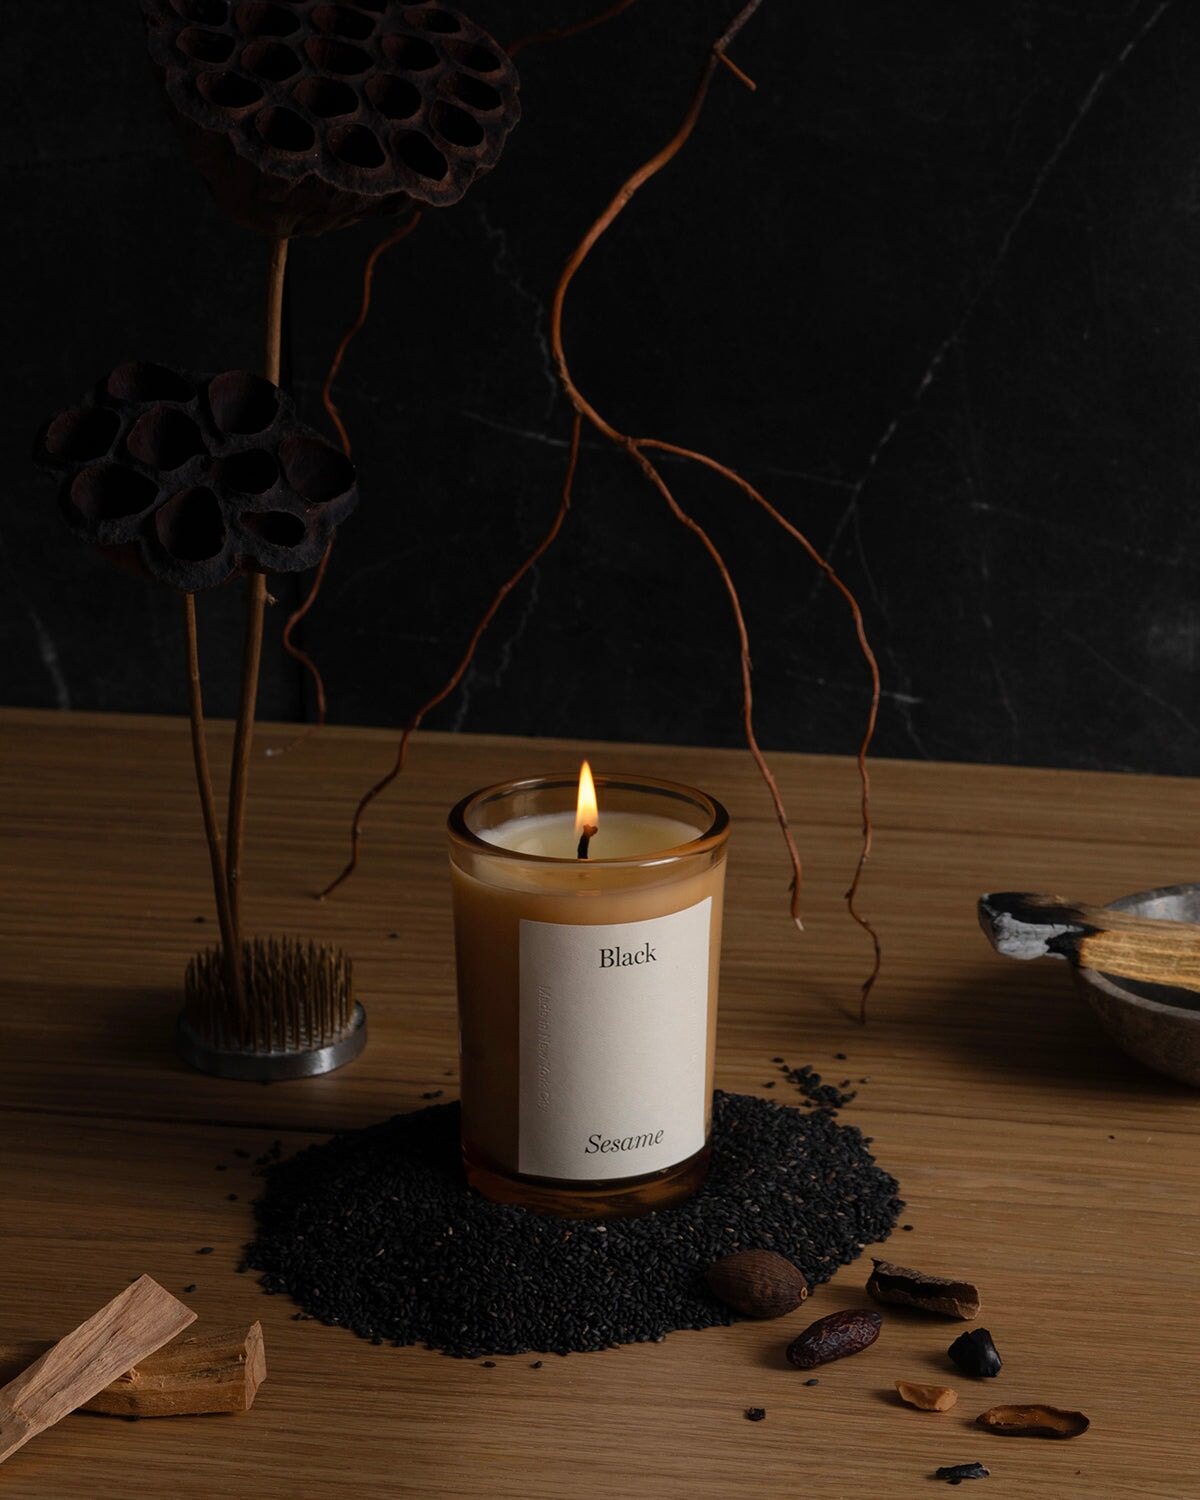 March: Limited Edition Black Sesame Candle Limited Edition Brooklyn Candle Studio 